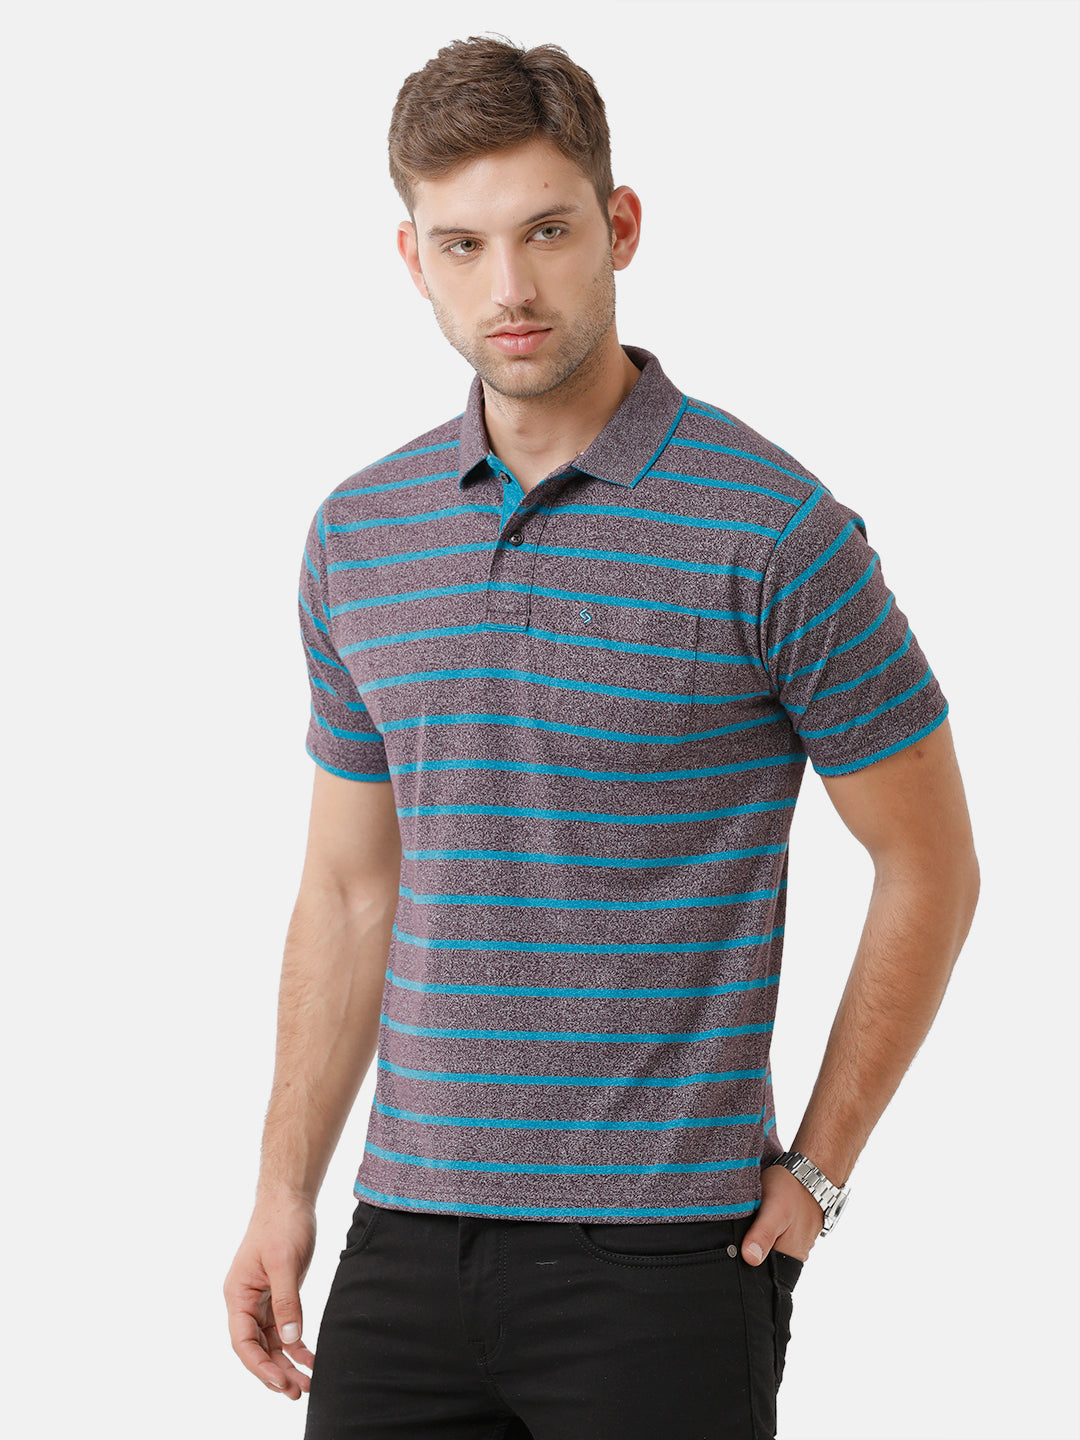 Classic Polo Mens Cotton Blend Striped Half Sleeve Authentic Fit Polo Neck Dark Grey Color T-Shirt | Mel 212 B